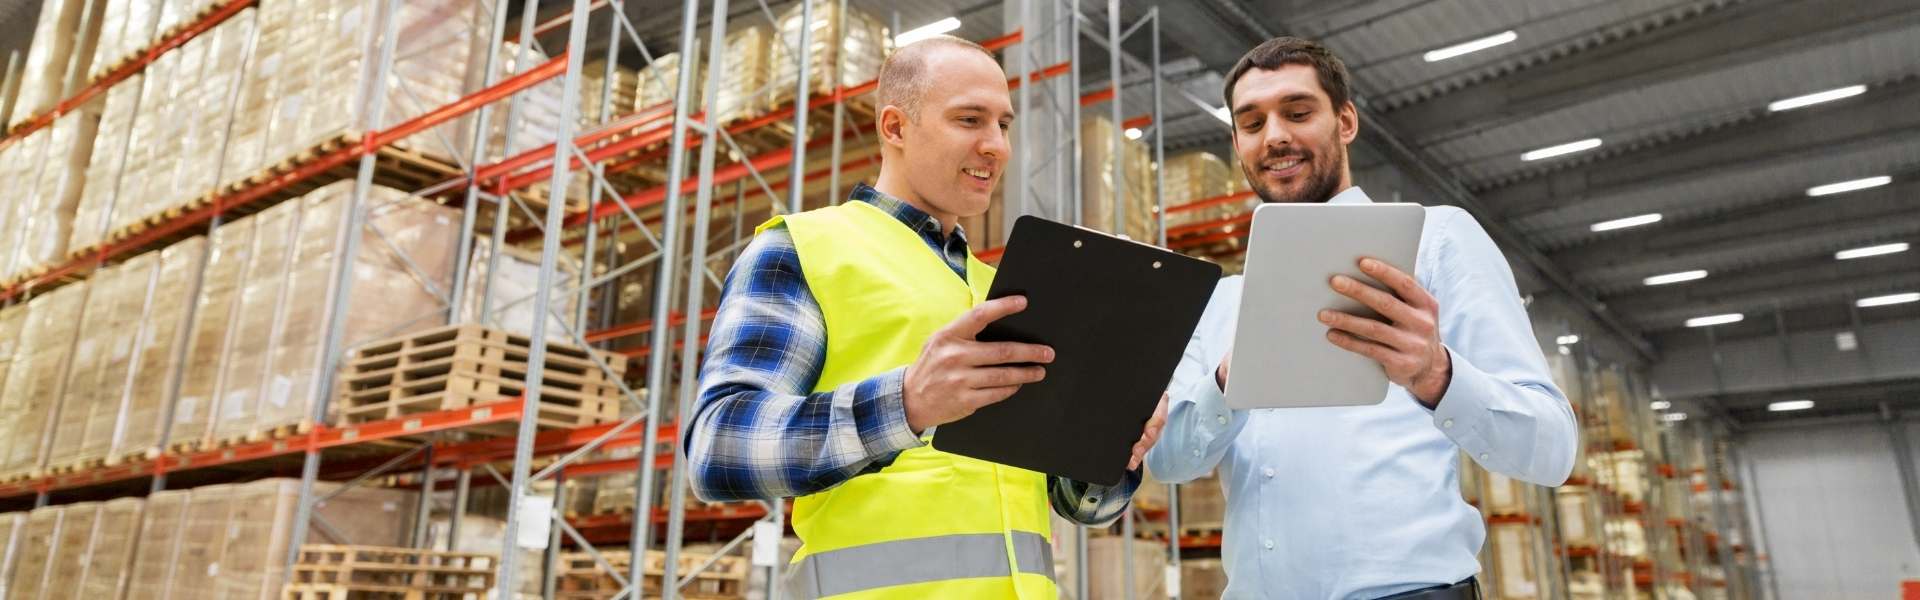 warehouse workers with clipboard